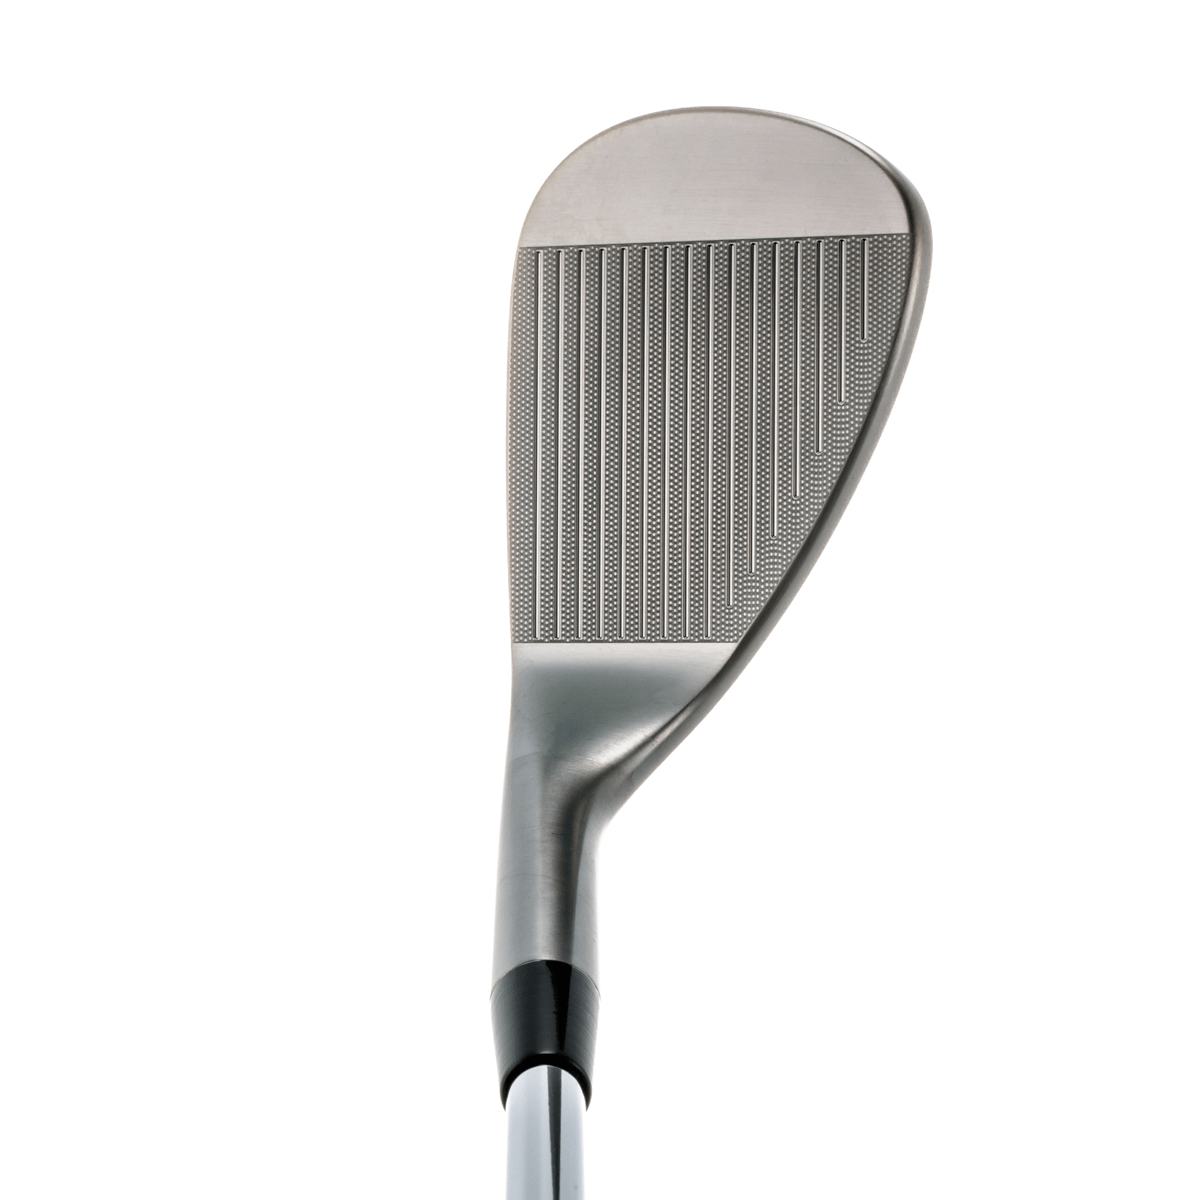 PROTOCONCEPT Golf, Forged Wedge - 27